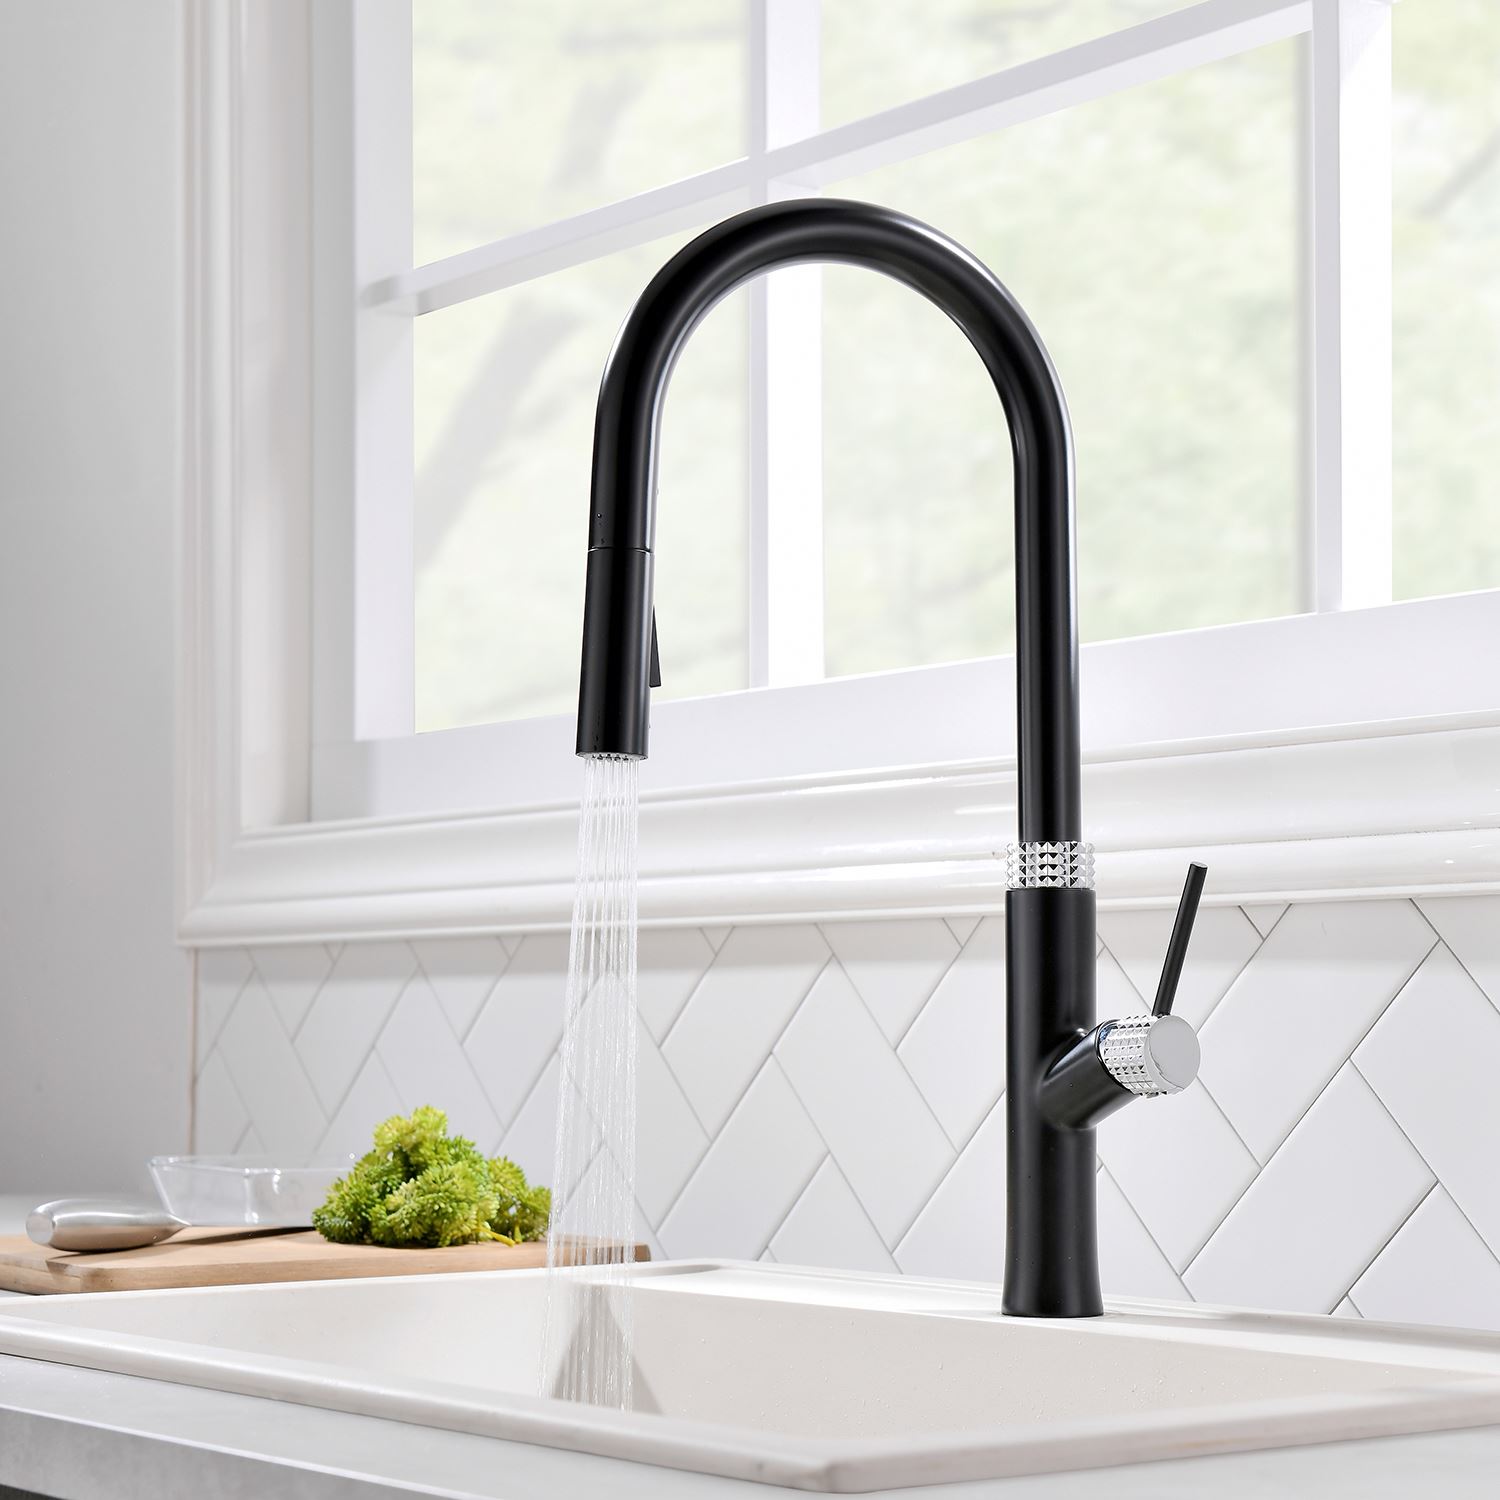 Gowo Water Filter For Faucet Matt Black Kitchen Mixer With High Quality